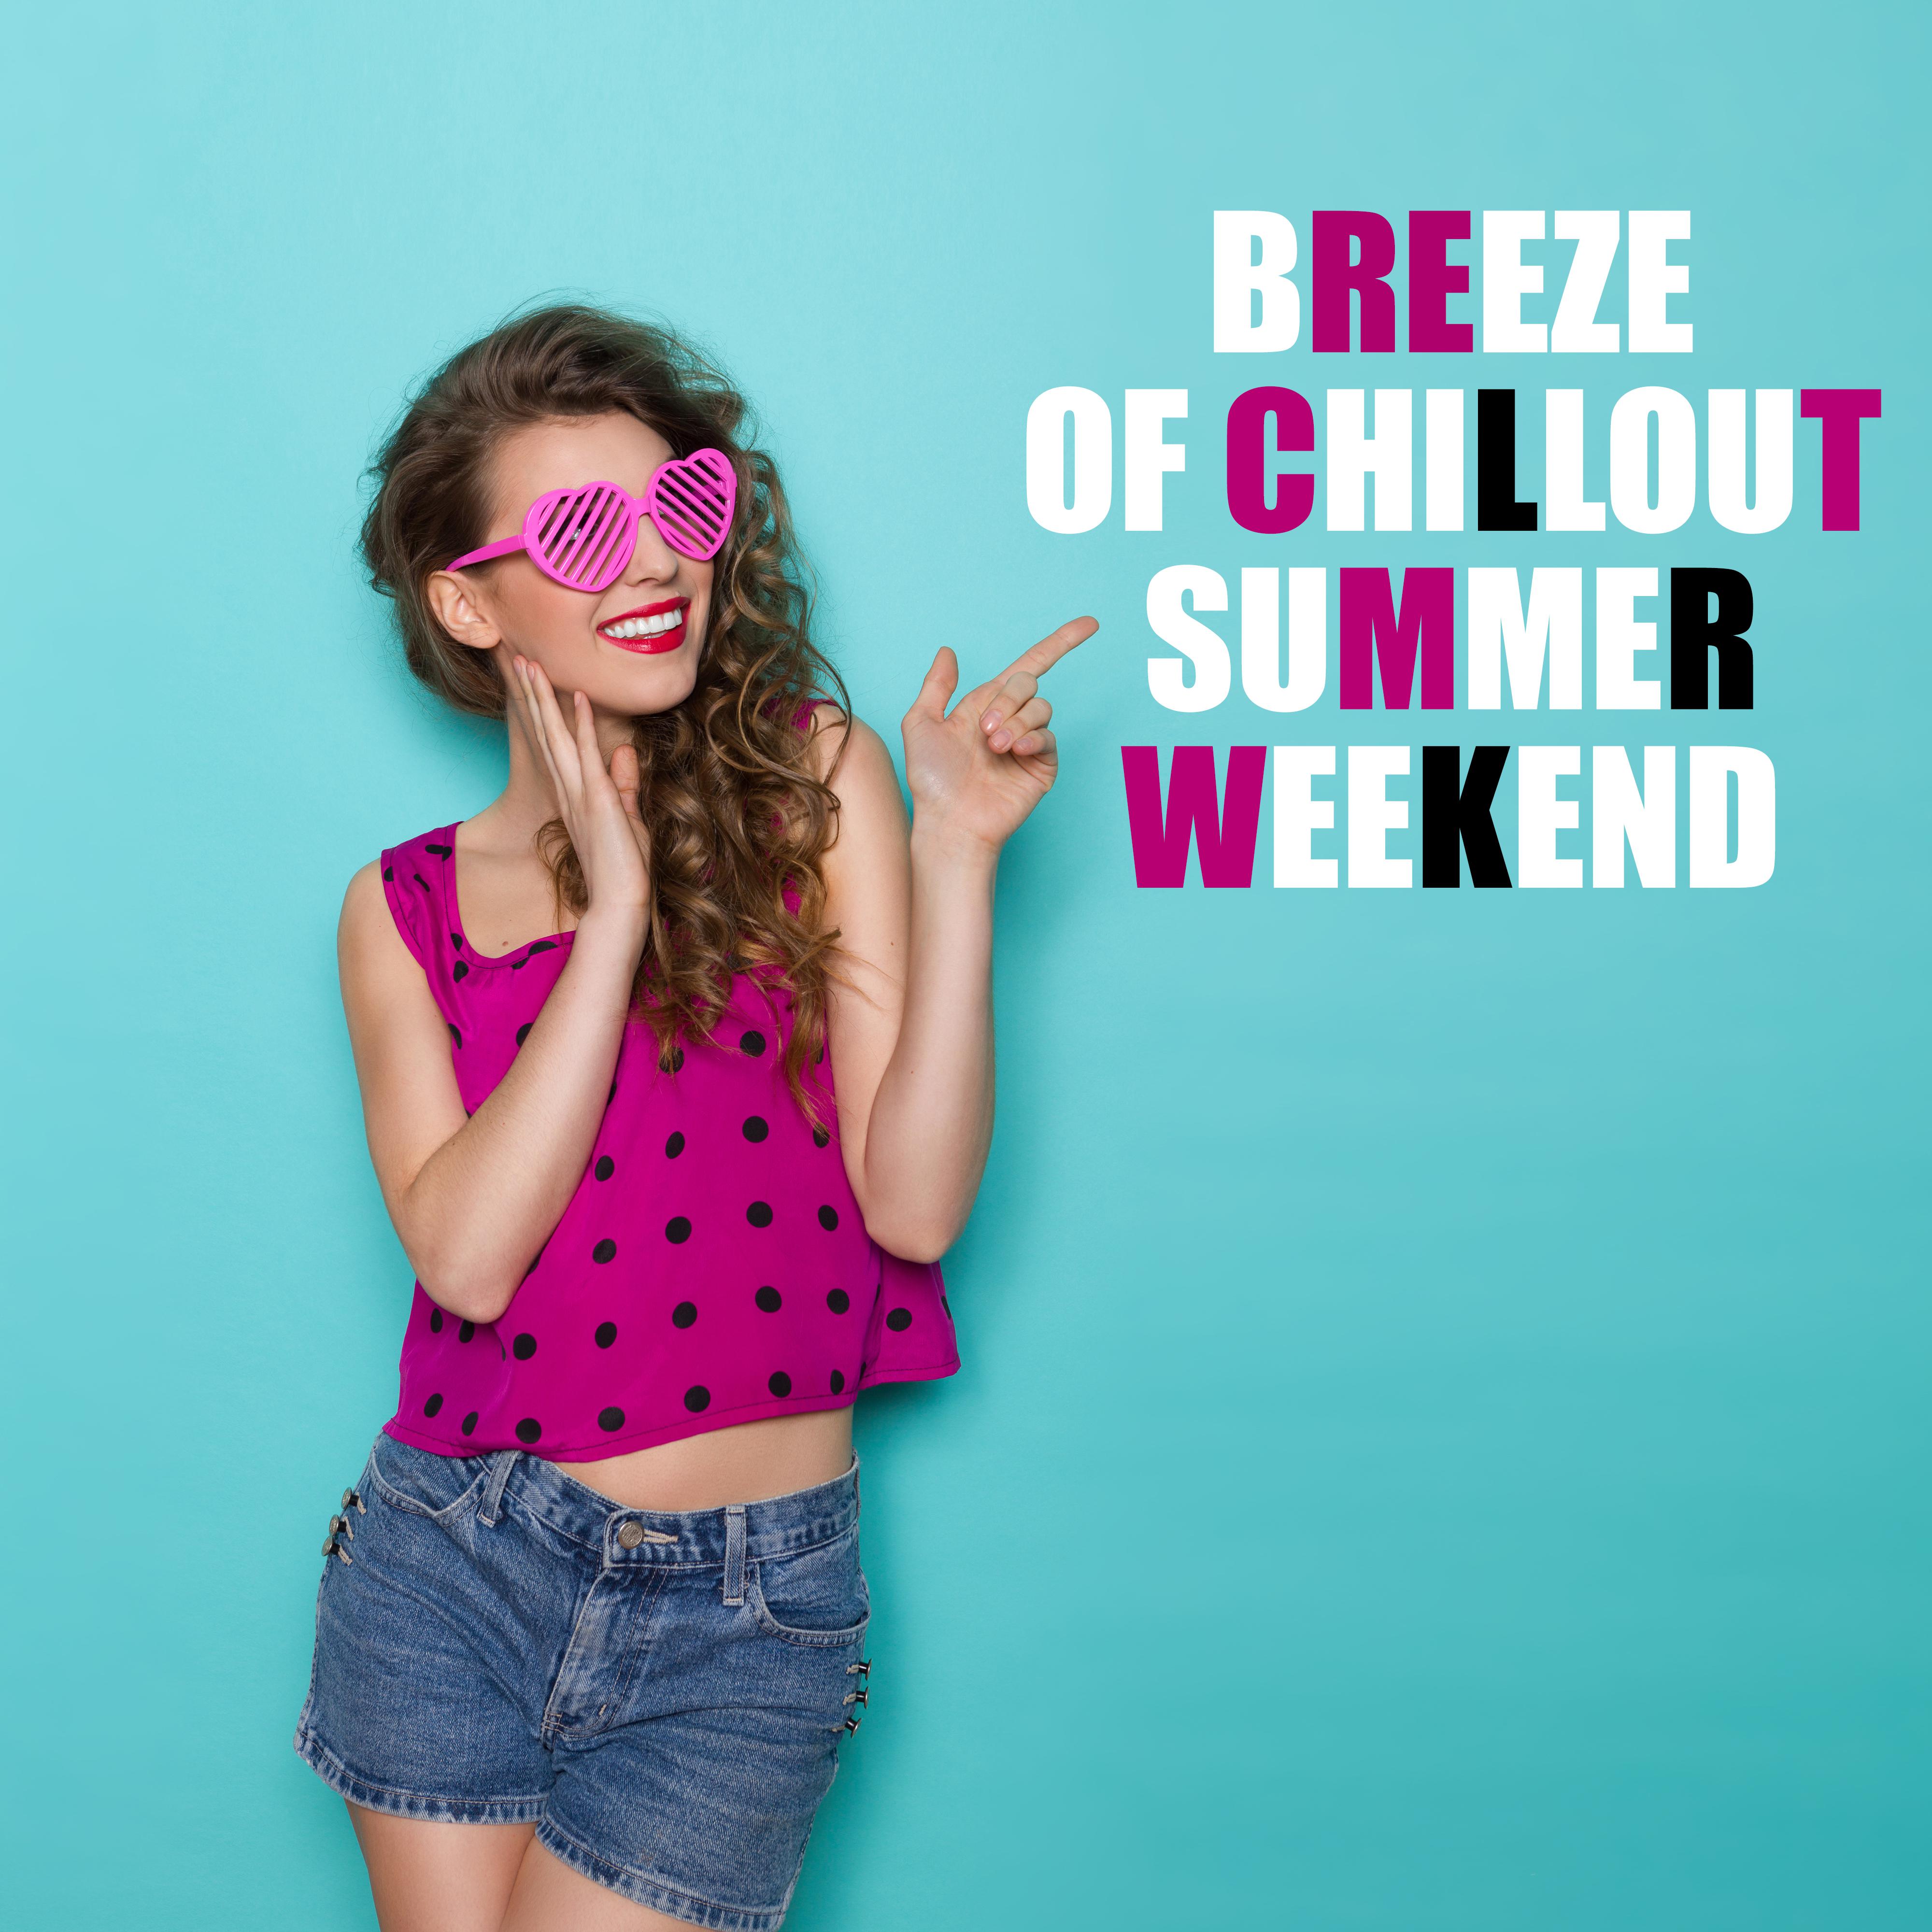 Breeze of Chillout Summer Weekend: Hot Holiday Electronic Tracks to Celebrate End of Week, Beach Relaxation After Work, After Party Music